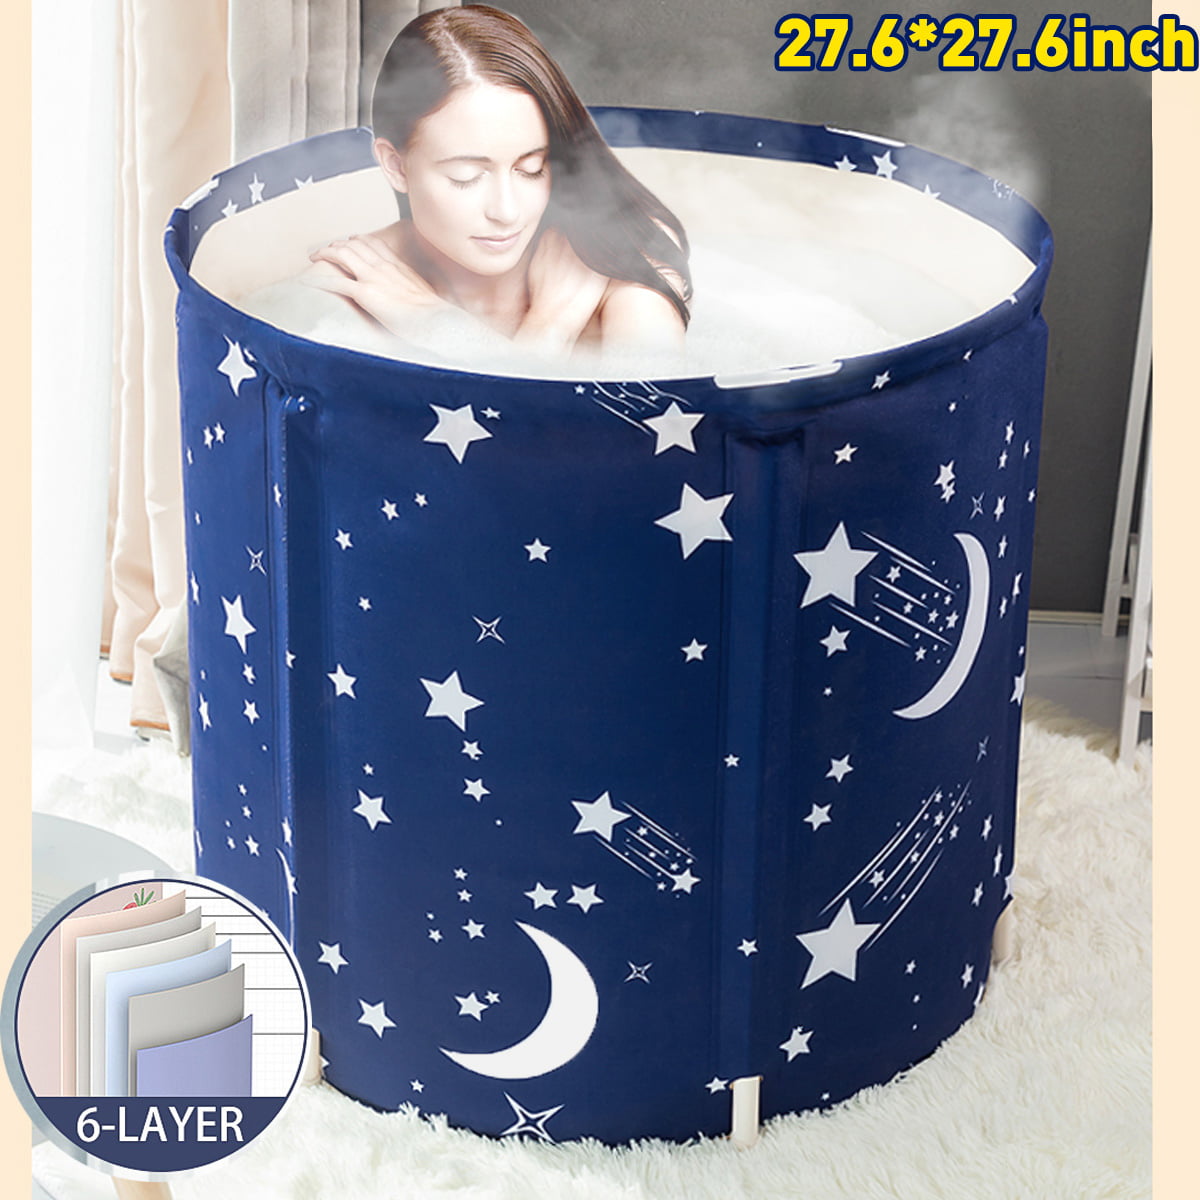 Portable Bath Tub Foldable Bathtub with Lid,Thicken Soaking Bath Tub,for Indoor Adult Shower Relaxation,Long-term Heat Preservation Suitable for Adults D A